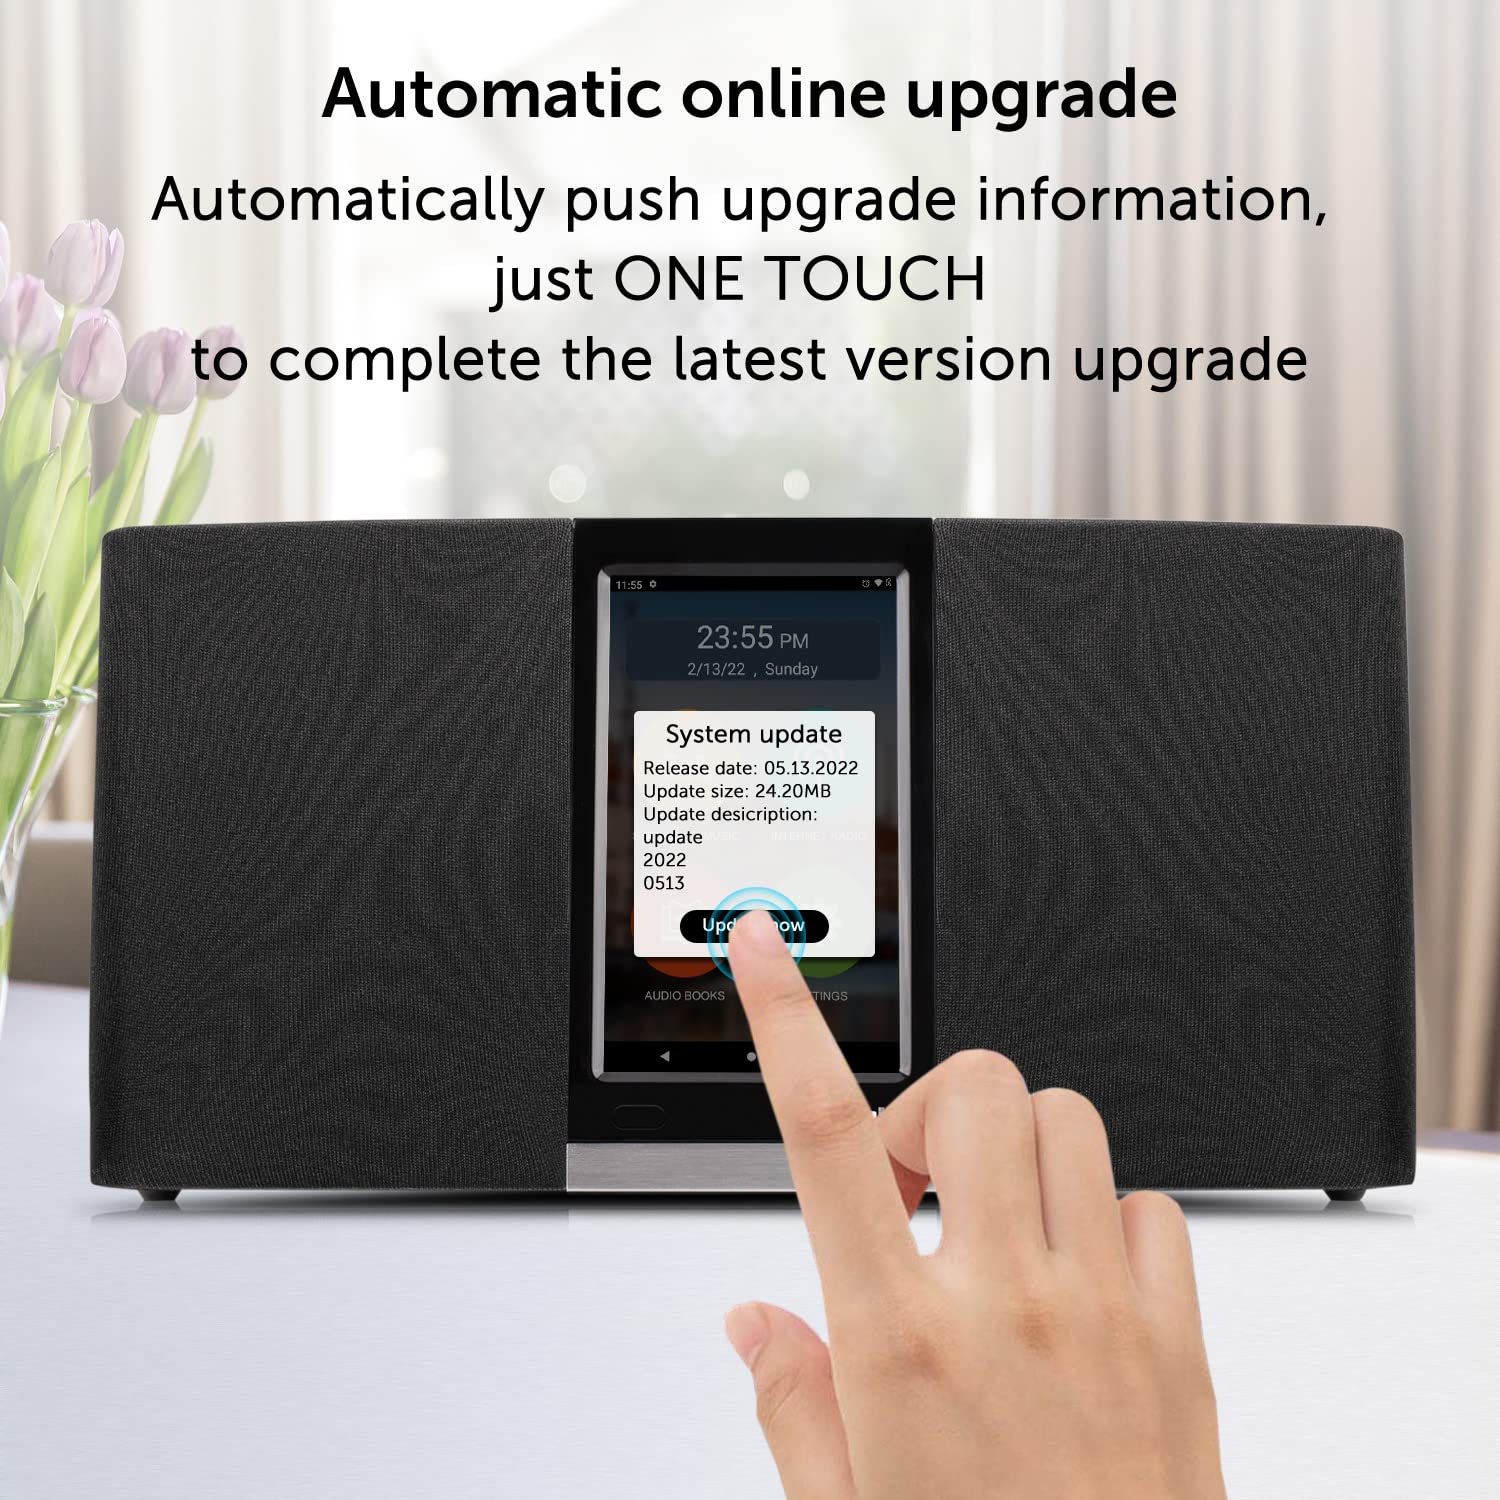 Sungale 3rd Gen. Wi-Fi Internet Radio with Easy Operation Touch Screen, Access Apps to Stream Music or Listen to Thousands of Internet Radio Stations, Frees up Your Smartphone, Black